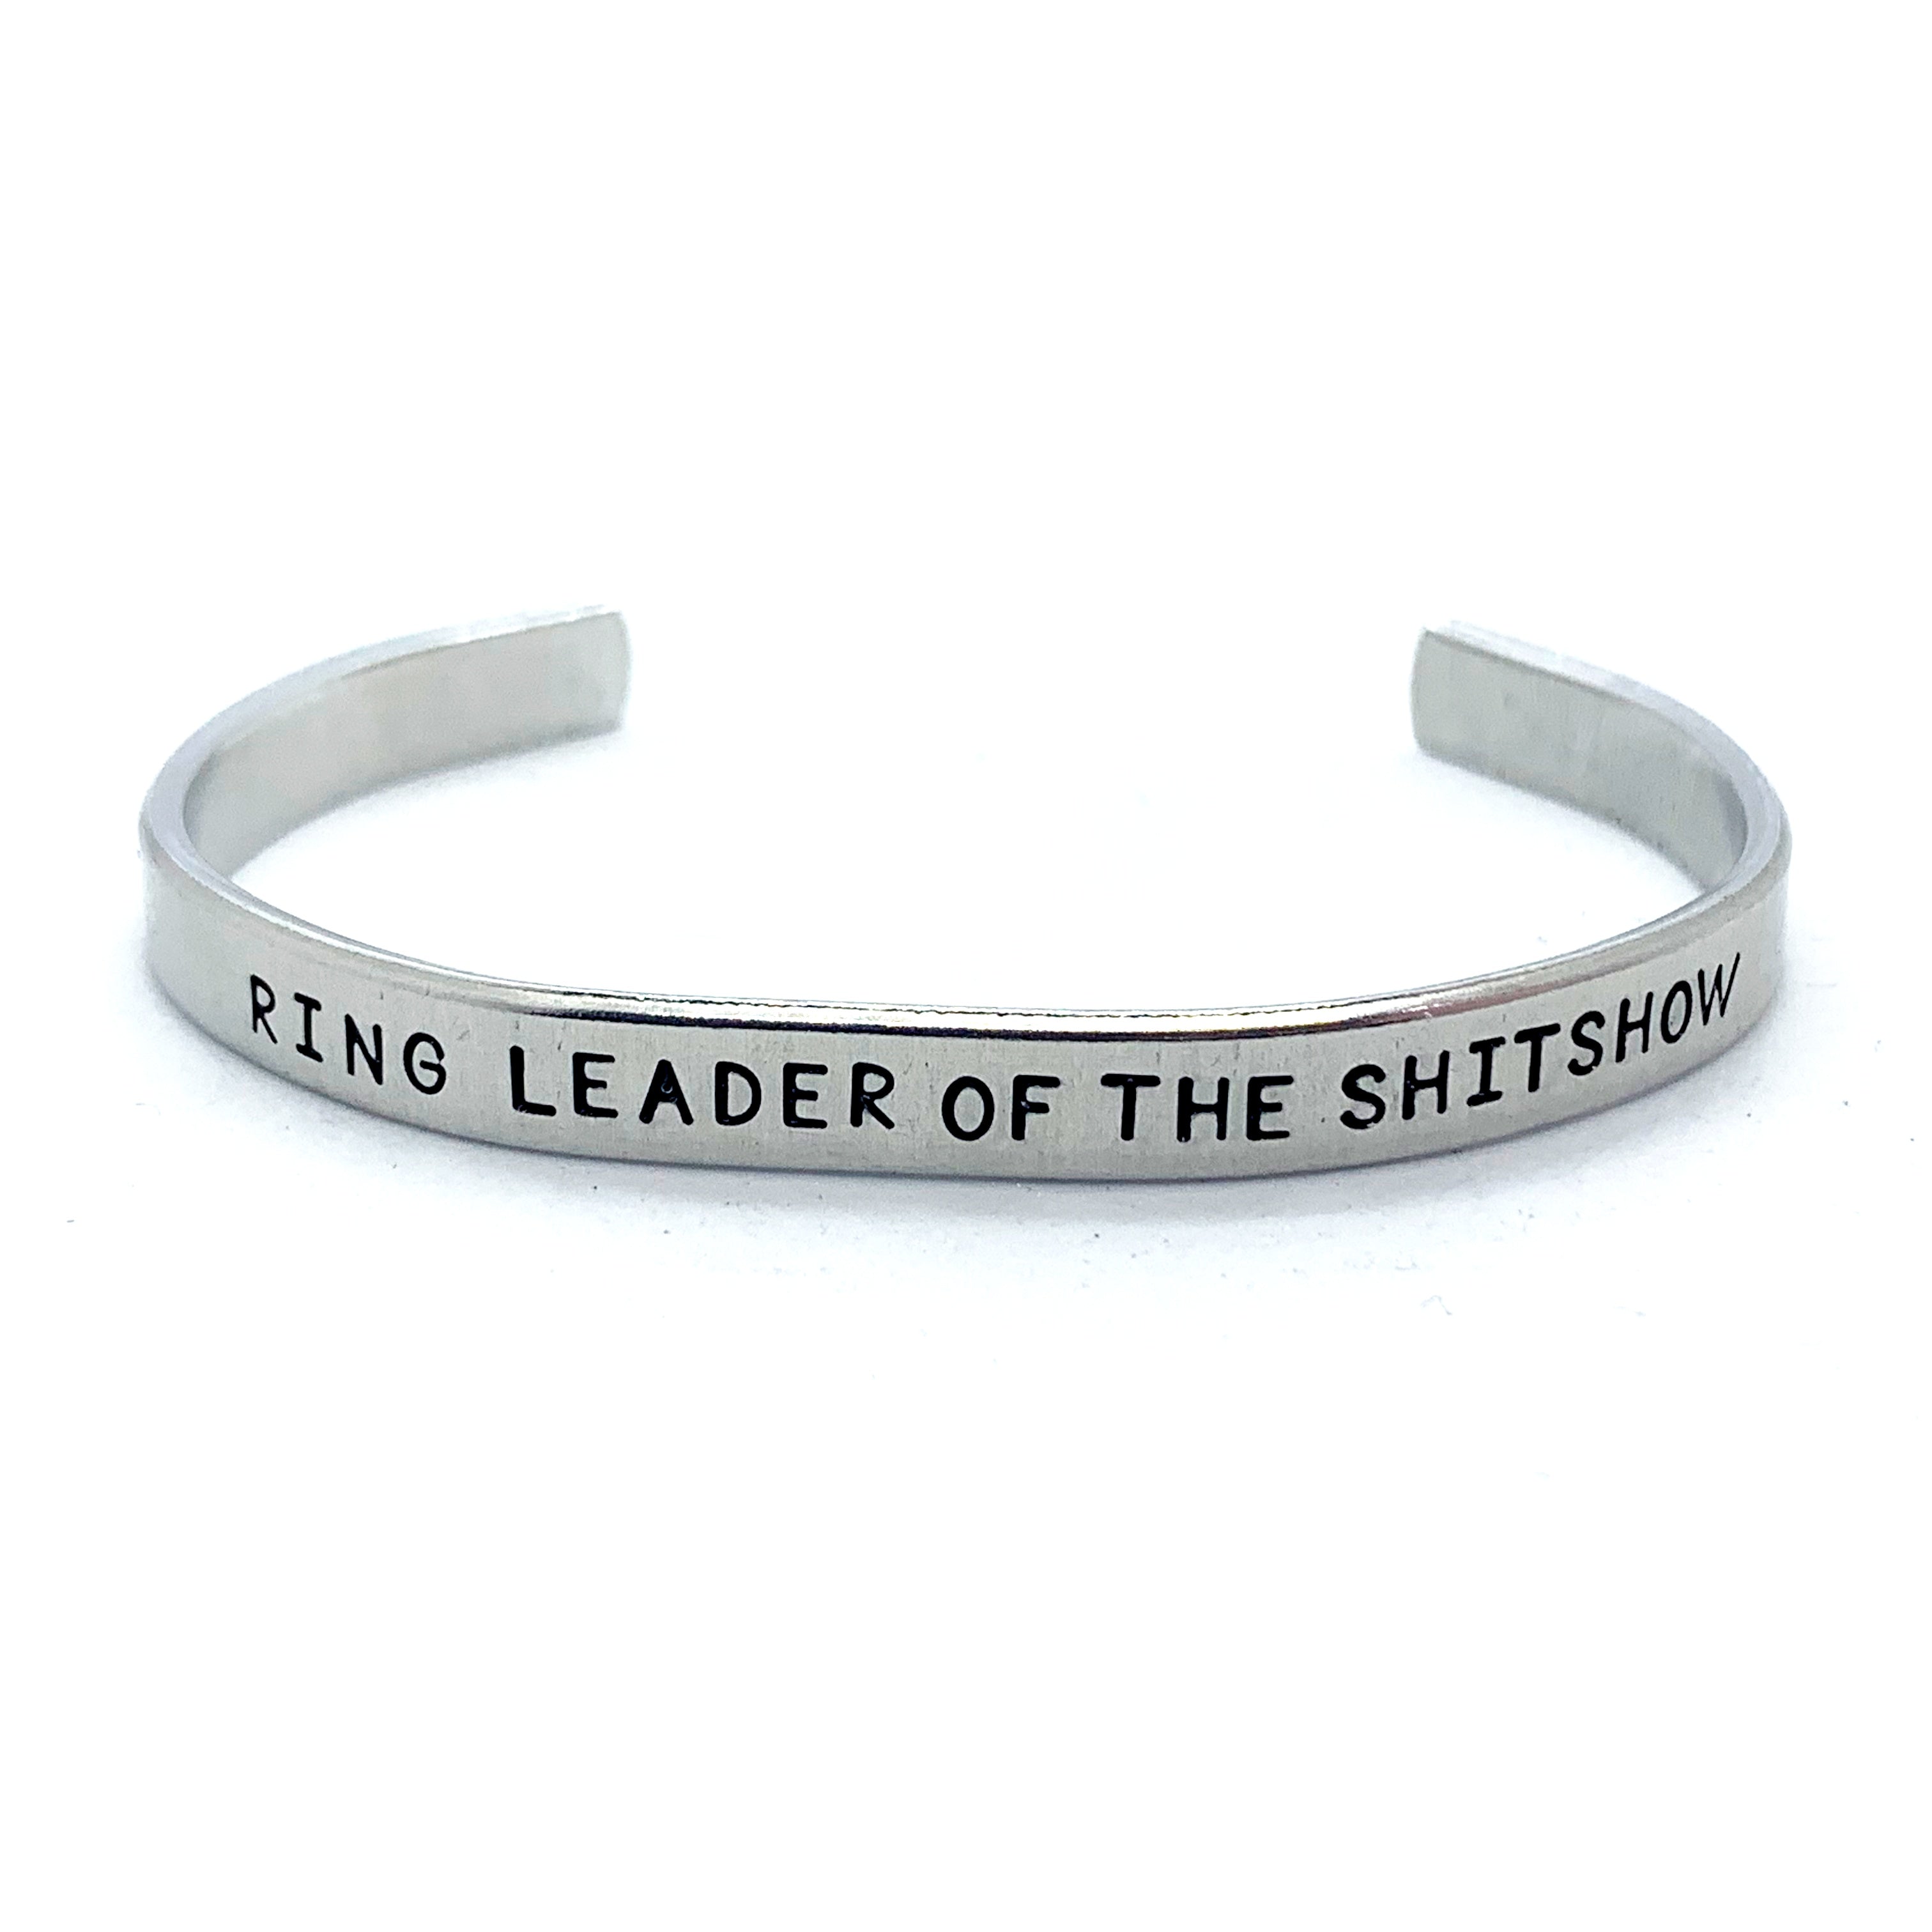 ¼ inch Aluminum Cuff - Ring Leader Of The Shit Show